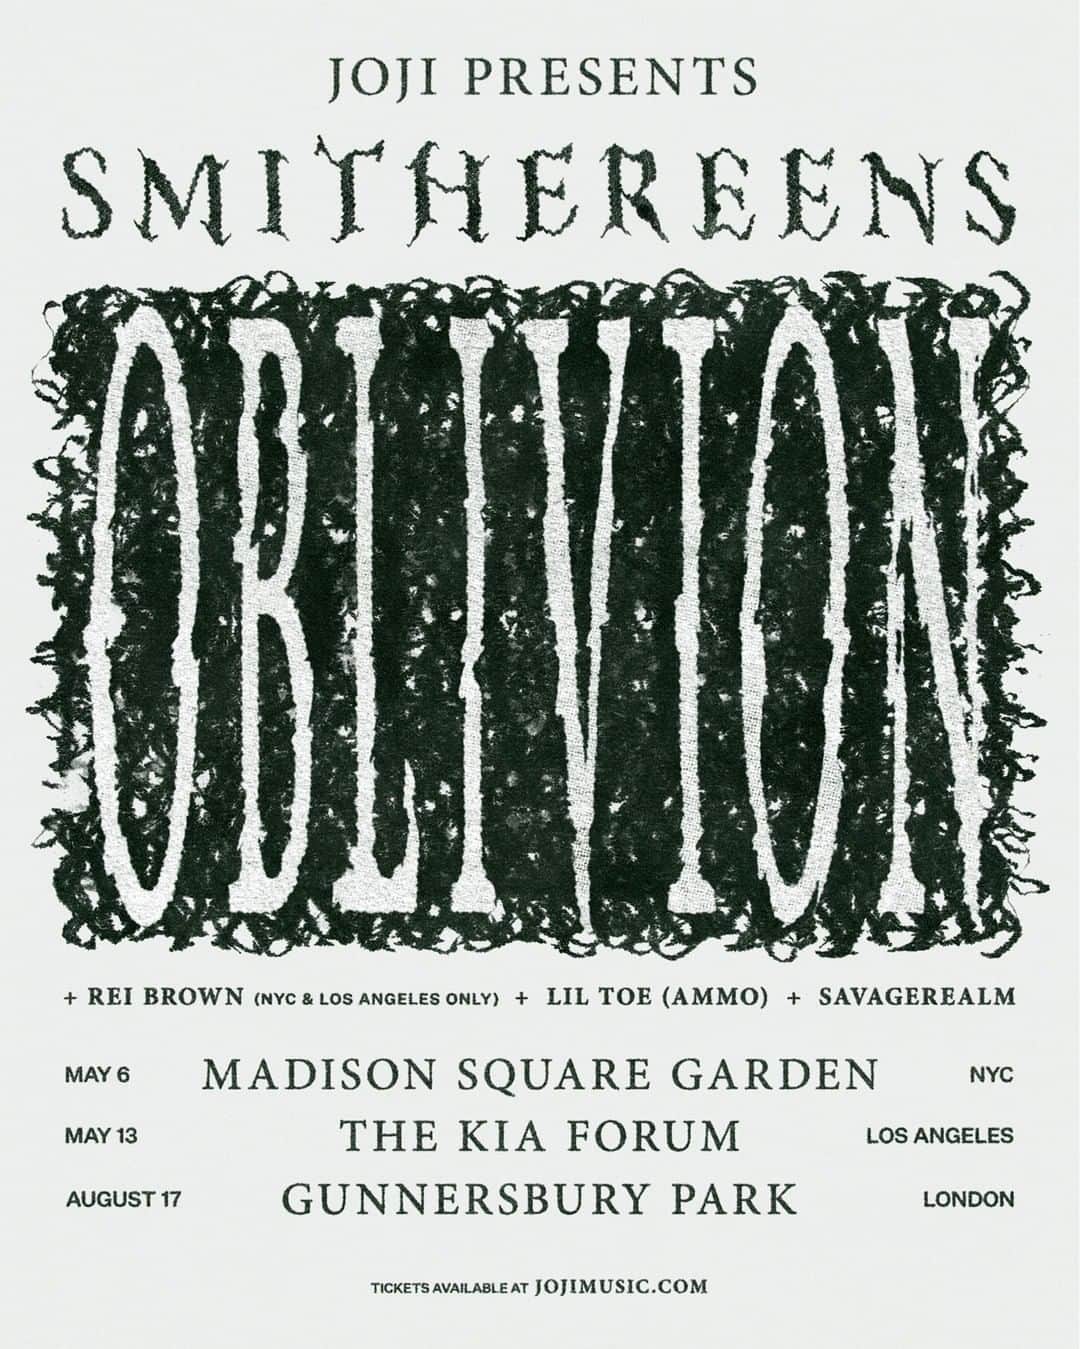 Jojiのインスタグラム：「SMITHEREENS OBLIVION w/ @reibrown @liltoe @savagerealm. Pre-sales start Wednesday Nov 9th 10 AM local time. Register for pre-sale access at jojimusic.com  May 6 - NYC @ Madison Square Garden May 13 - LA @ Kia Forum Aug 17 - LDN @ Gunnersbury Park」